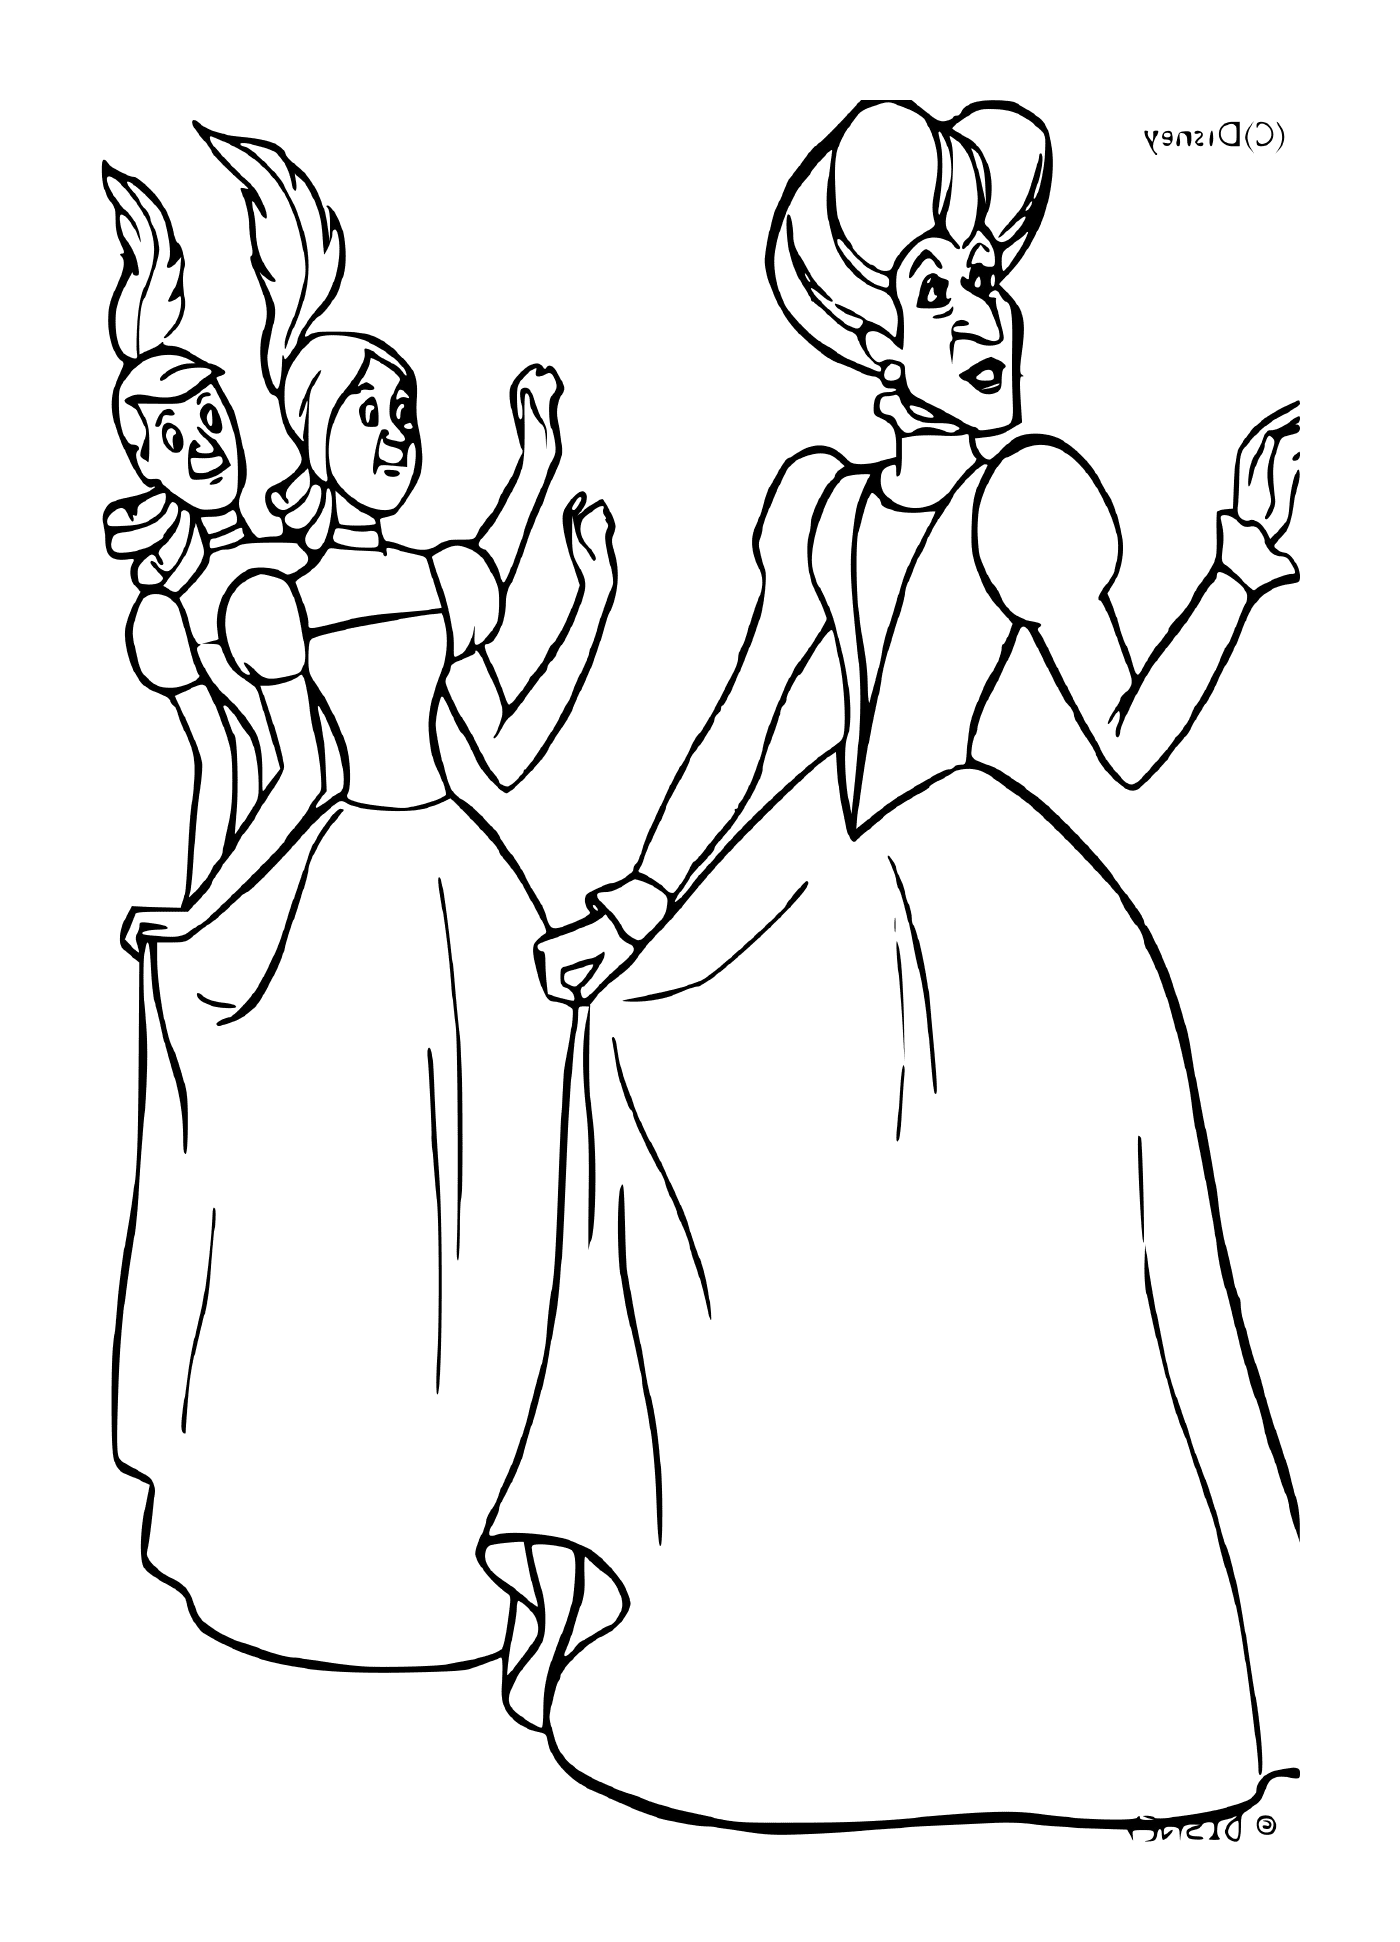  Lady Tremaine observes two people in a room 